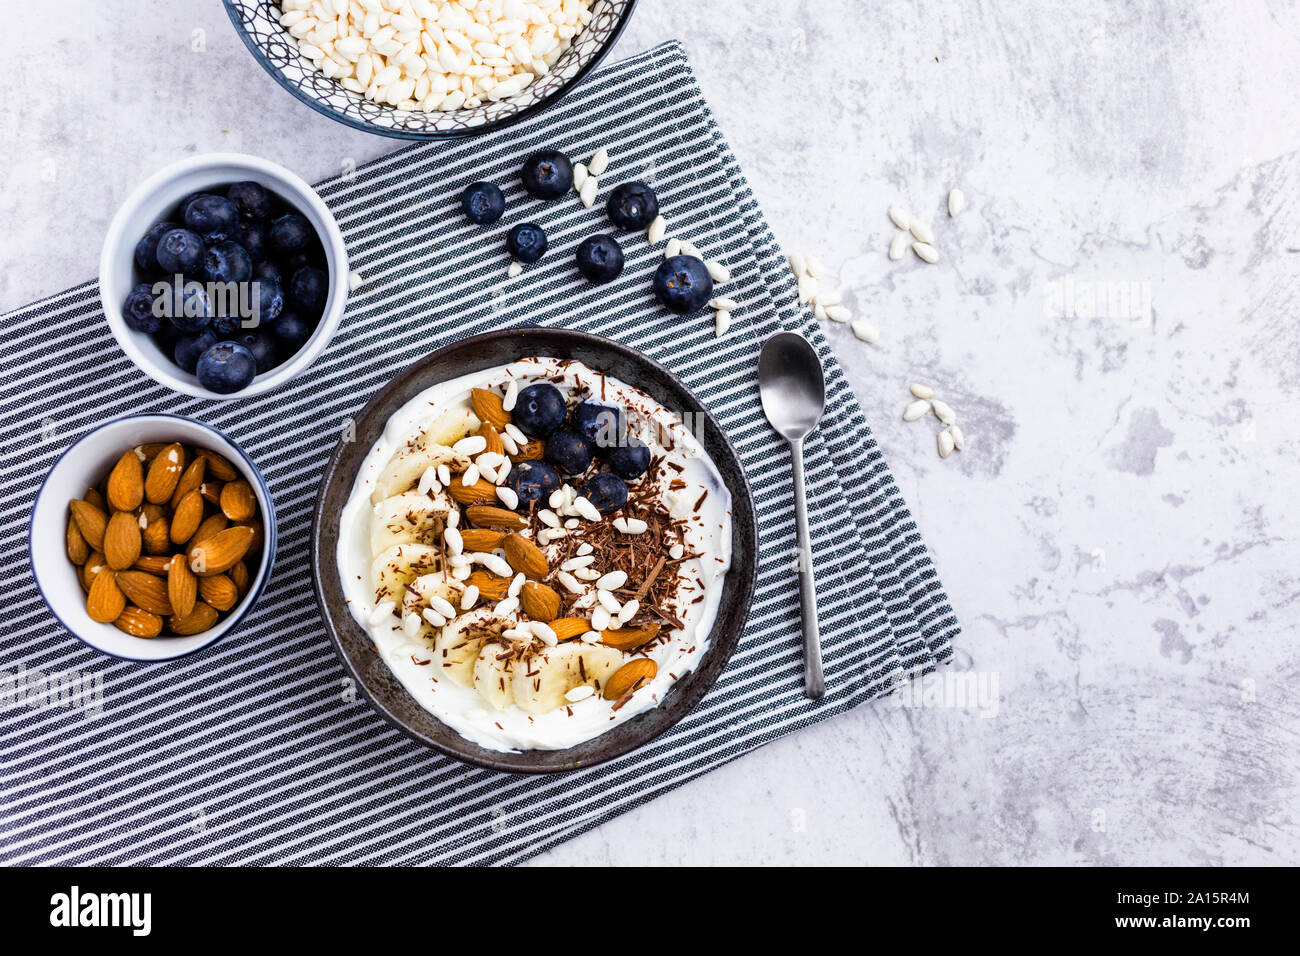 Bowl of fresh muesli, blueberries and almonds seen from above Stock Photo